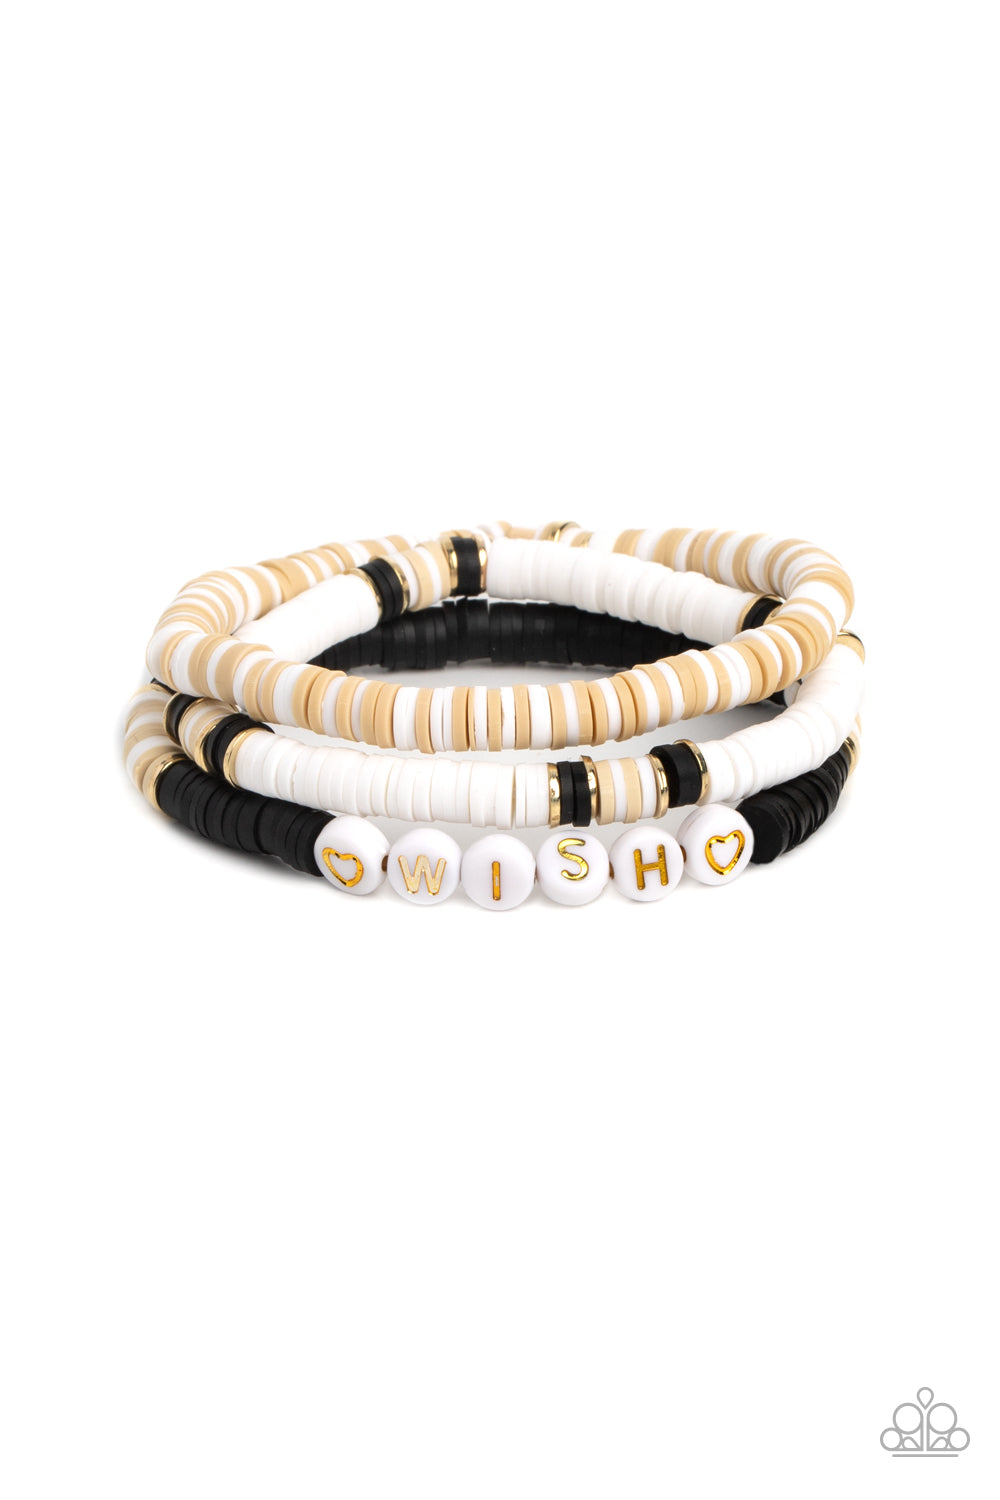 Matriarchal Melody - Black And Gold Wish Bracelet - Paparazzi Accessories - Varying in shades, tan, black, and white clay discs pair with shiny gold disc beads and accents creating layers across the wrist. Featured on one of the bracelets, white beads stamped with gold lettering spell out the word "wish," while gold heart silhouettes stamped in the same white beads frame the inspirational phrase for a wistful finish.